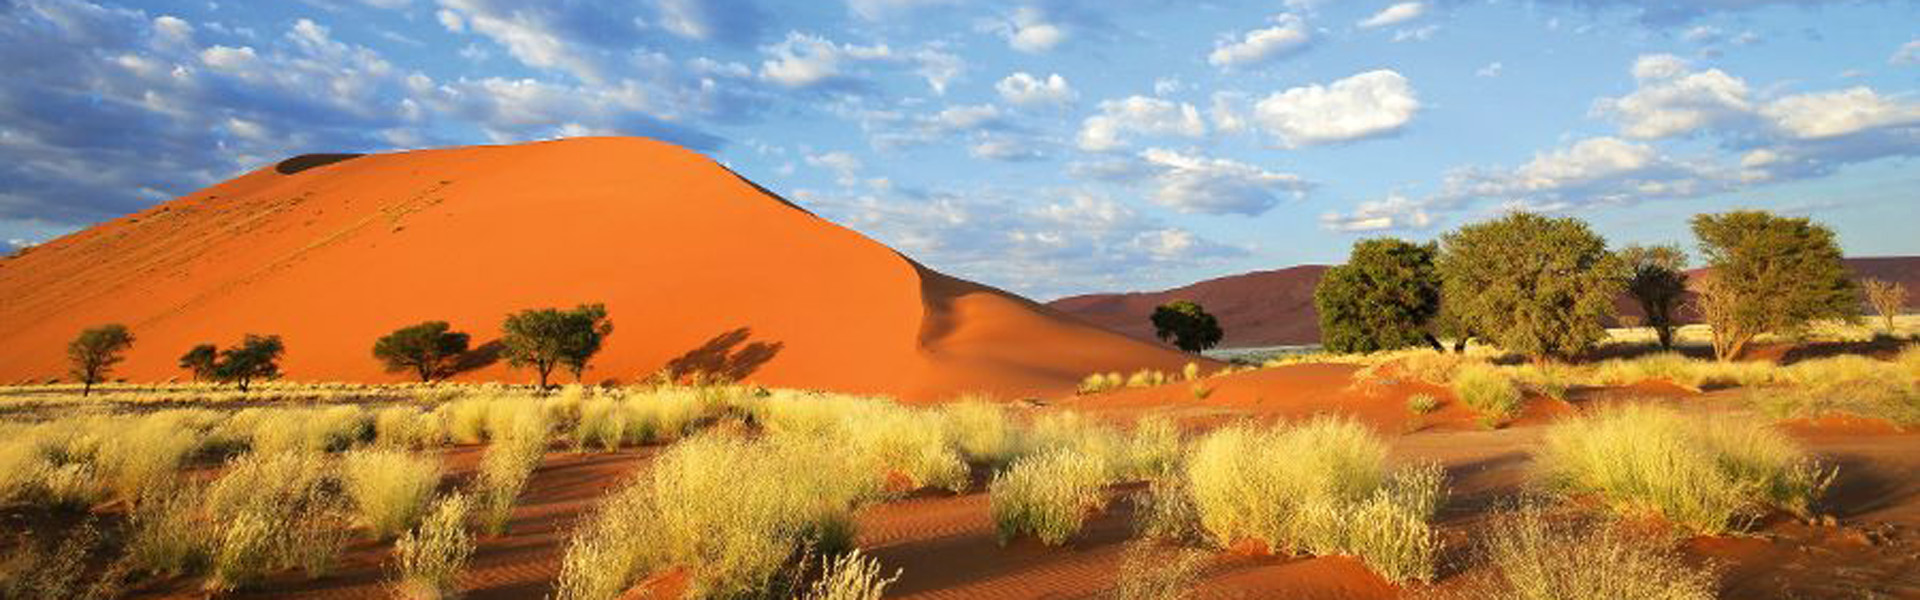 Landscape with desert grasses, large sand dune and sky with clouds, Sossusvlei, Namibia, southern Africa